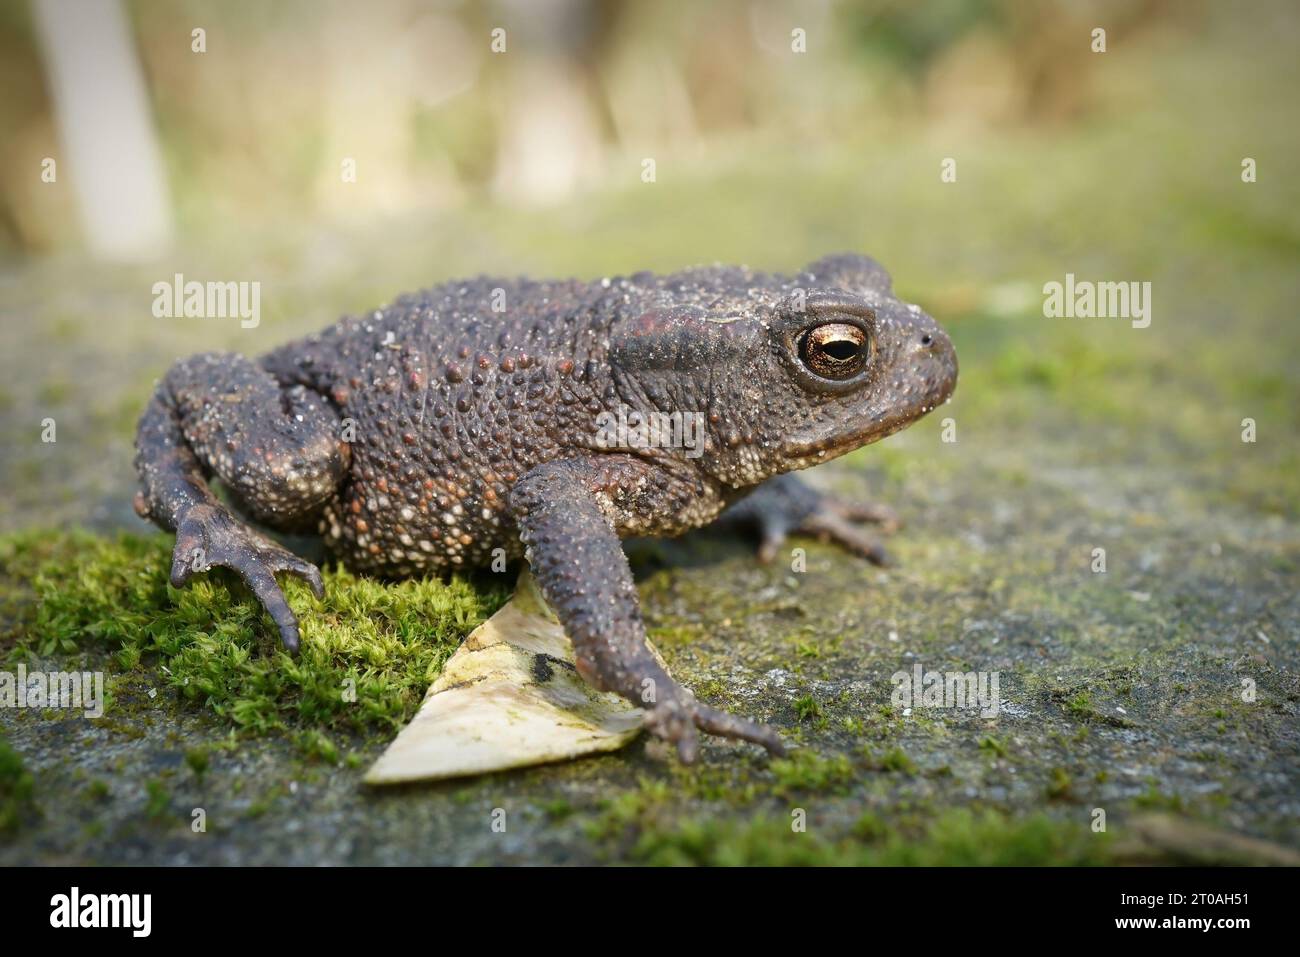 Natural closeup on a Common Europea toad, Bufo bufo sitting in the garden Stock Photo